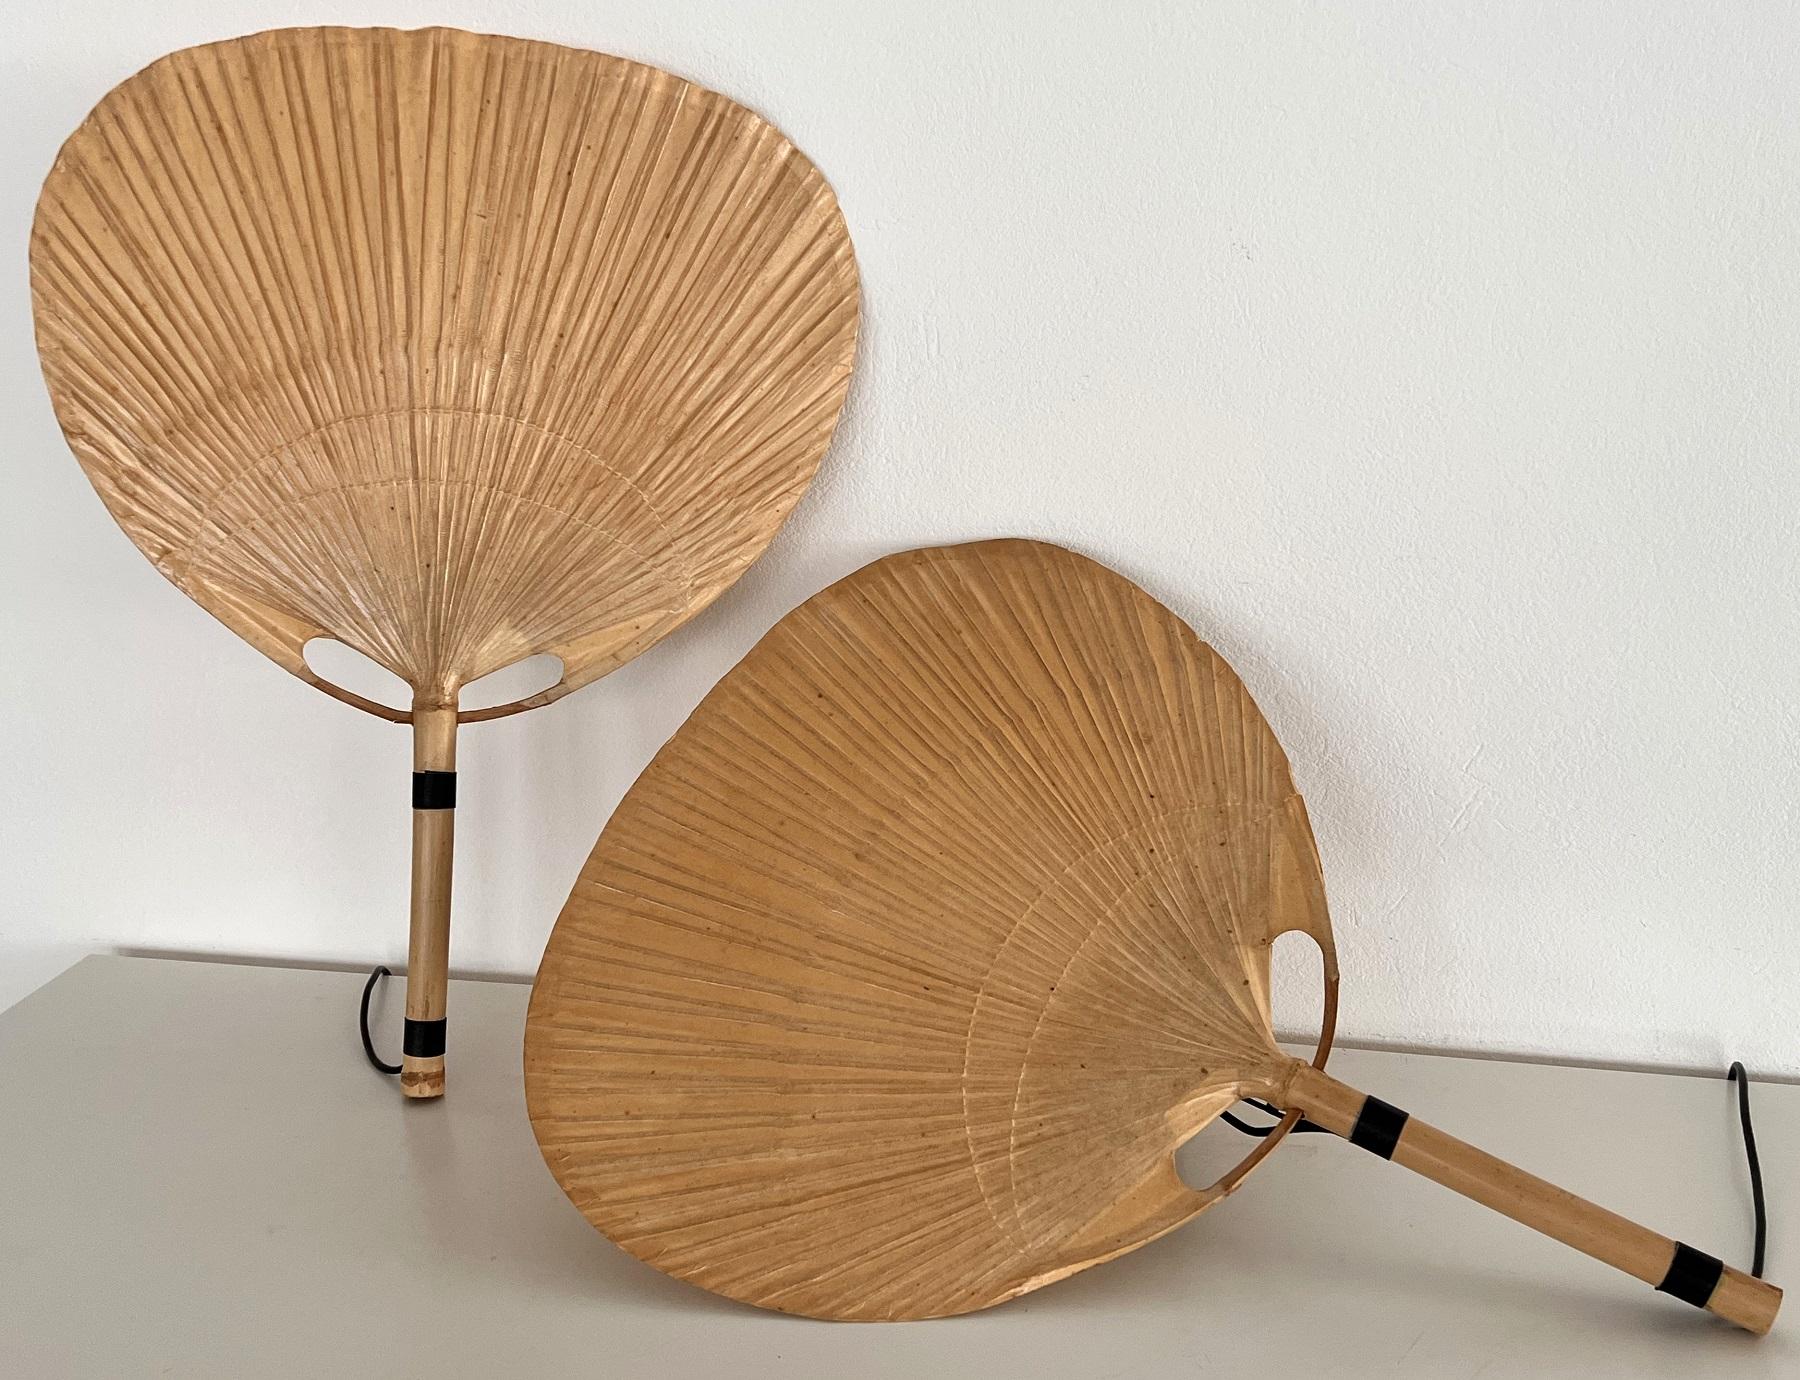 Hand-Crafted Rare Pair of Large Uchiwa Wall Sconces by Ingo Maurer, Germany, 1973